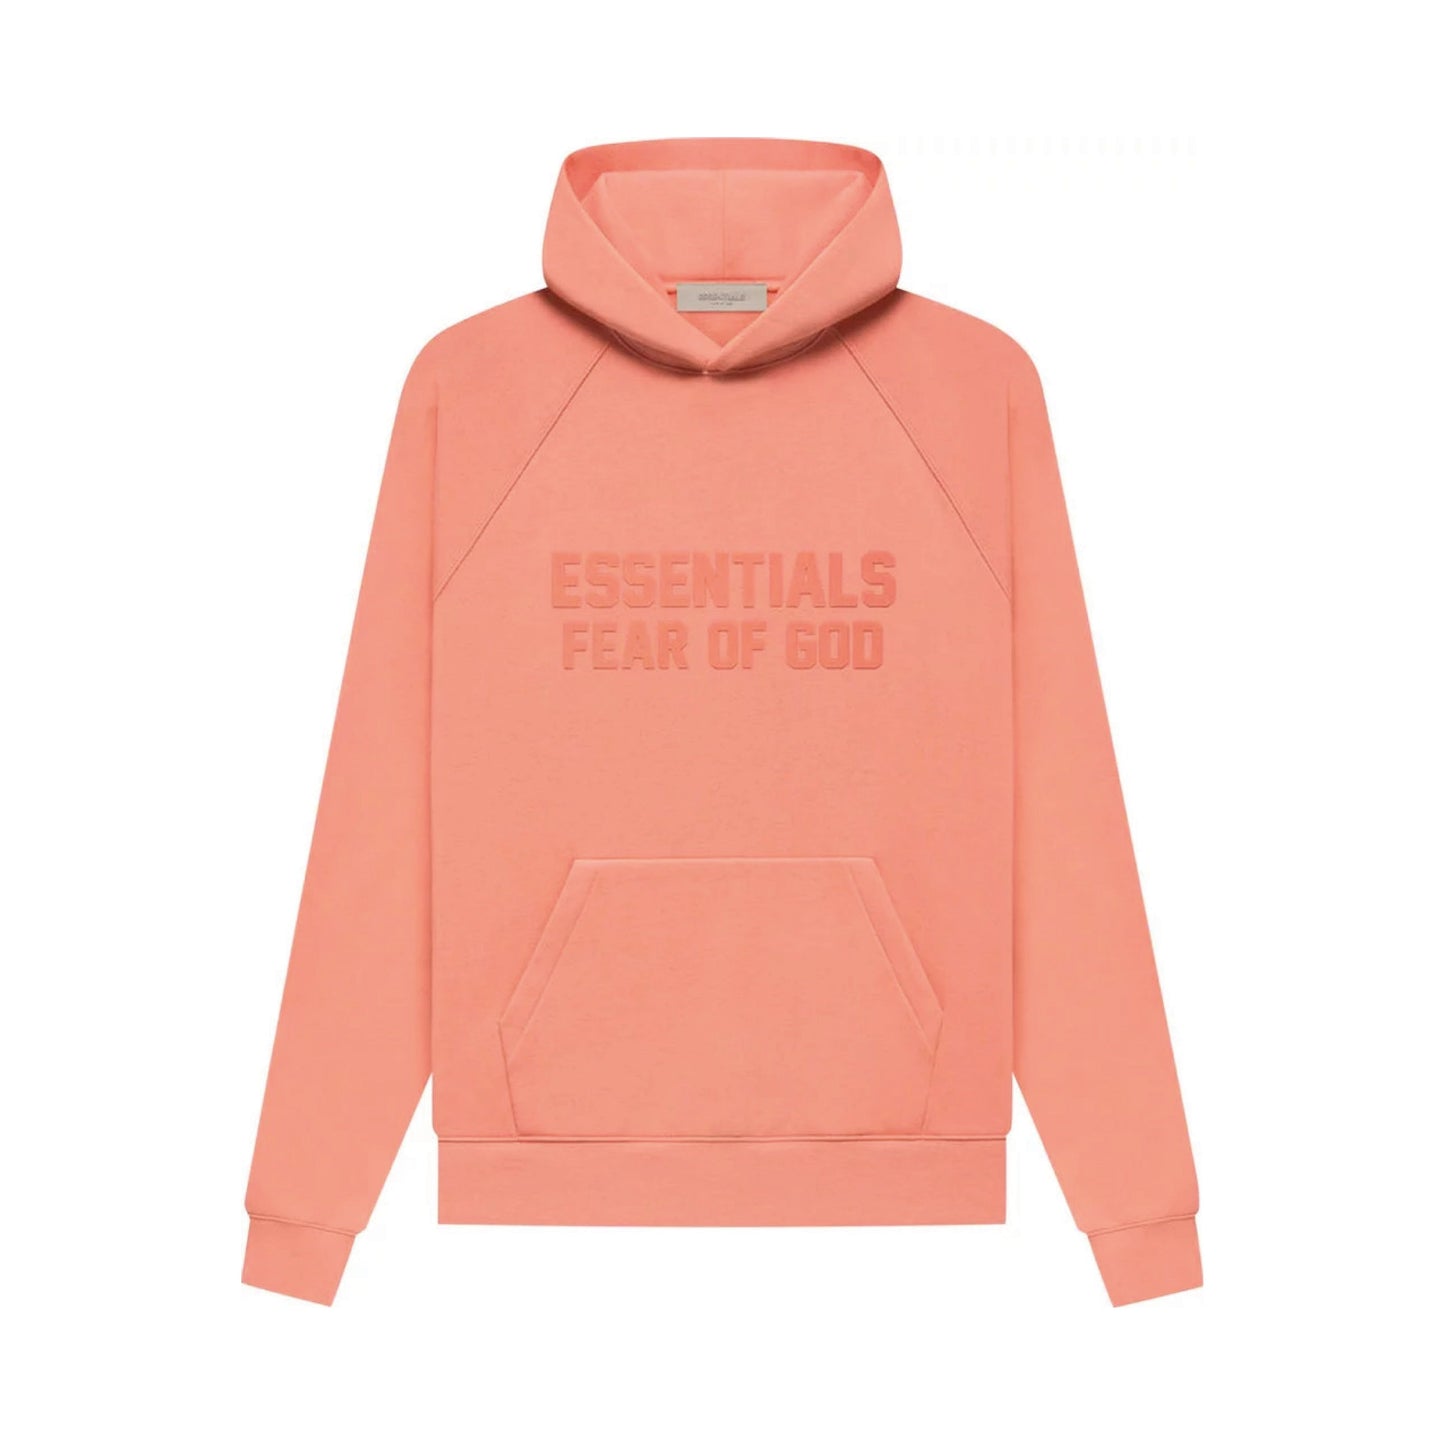 Fear of God Essentials Hoodie 'Coral'